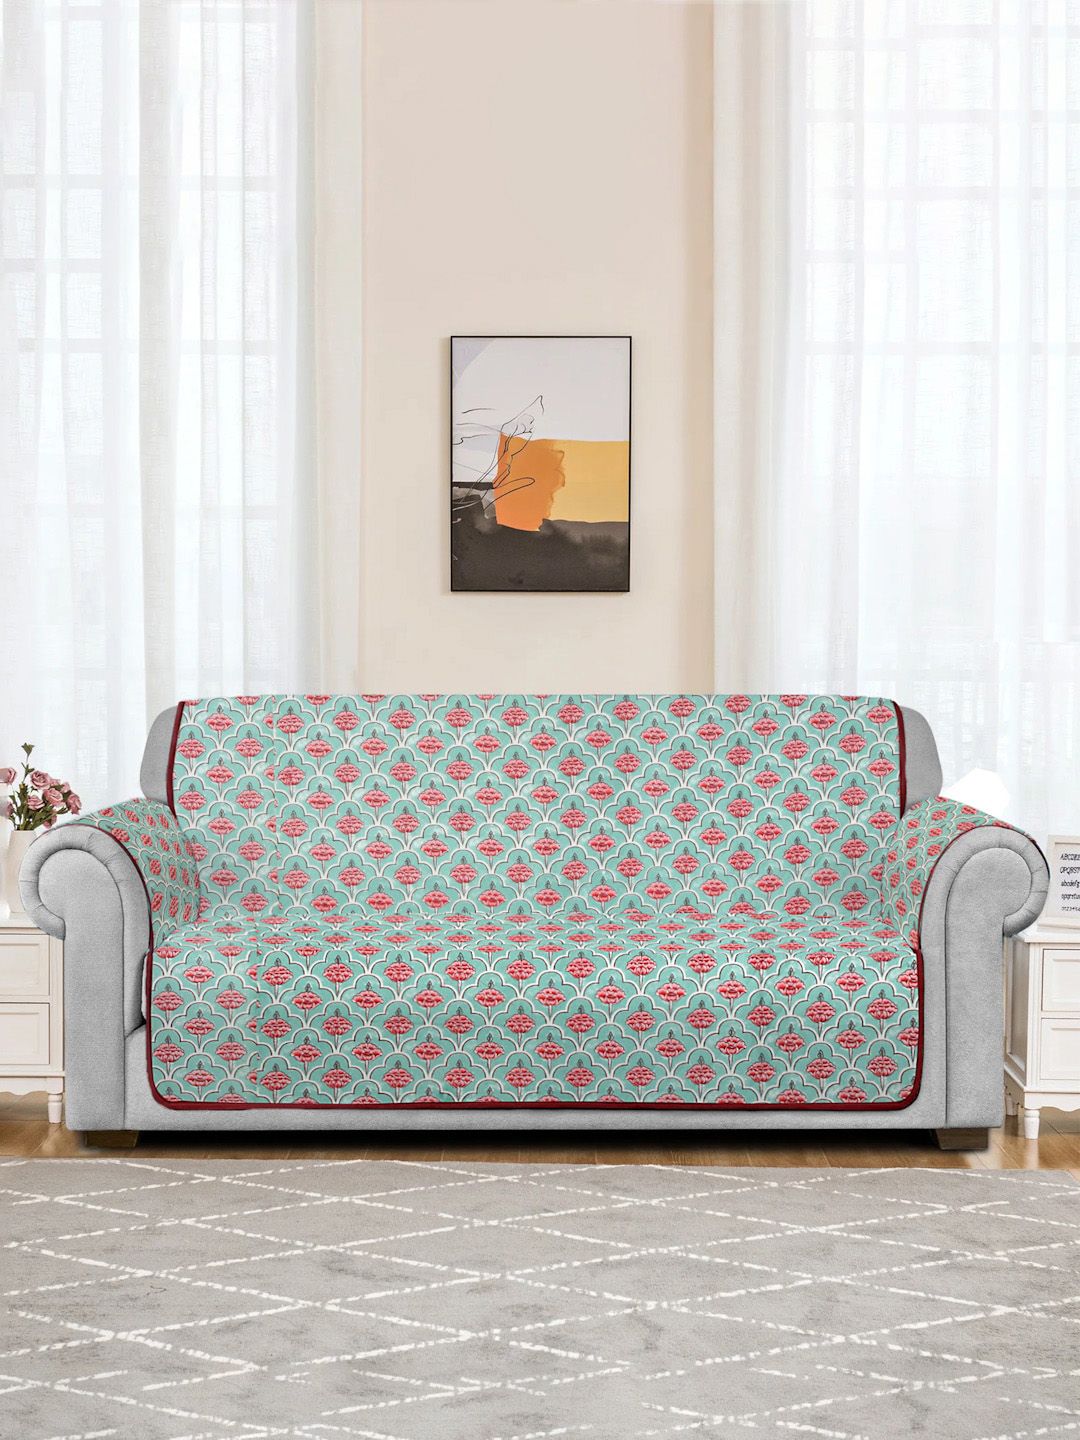 Rajasthan Decor Blue & Pink Floral Printed Cotton Quilted 2-Seater Cotton Sofa Cover Price in India